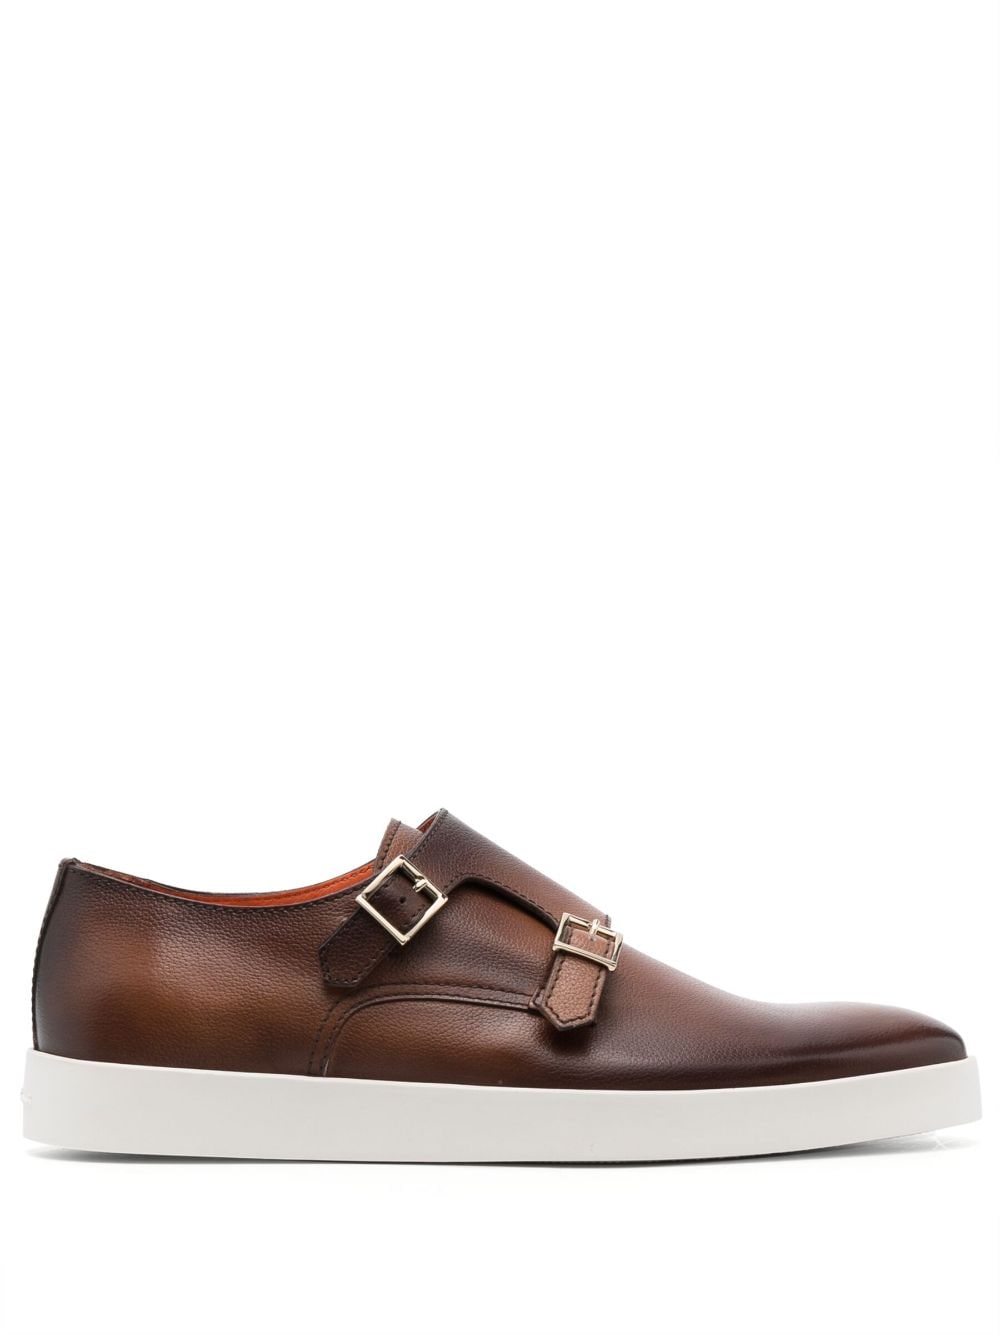 Santoni Double-buckle Leather Monk Shoes In Brown